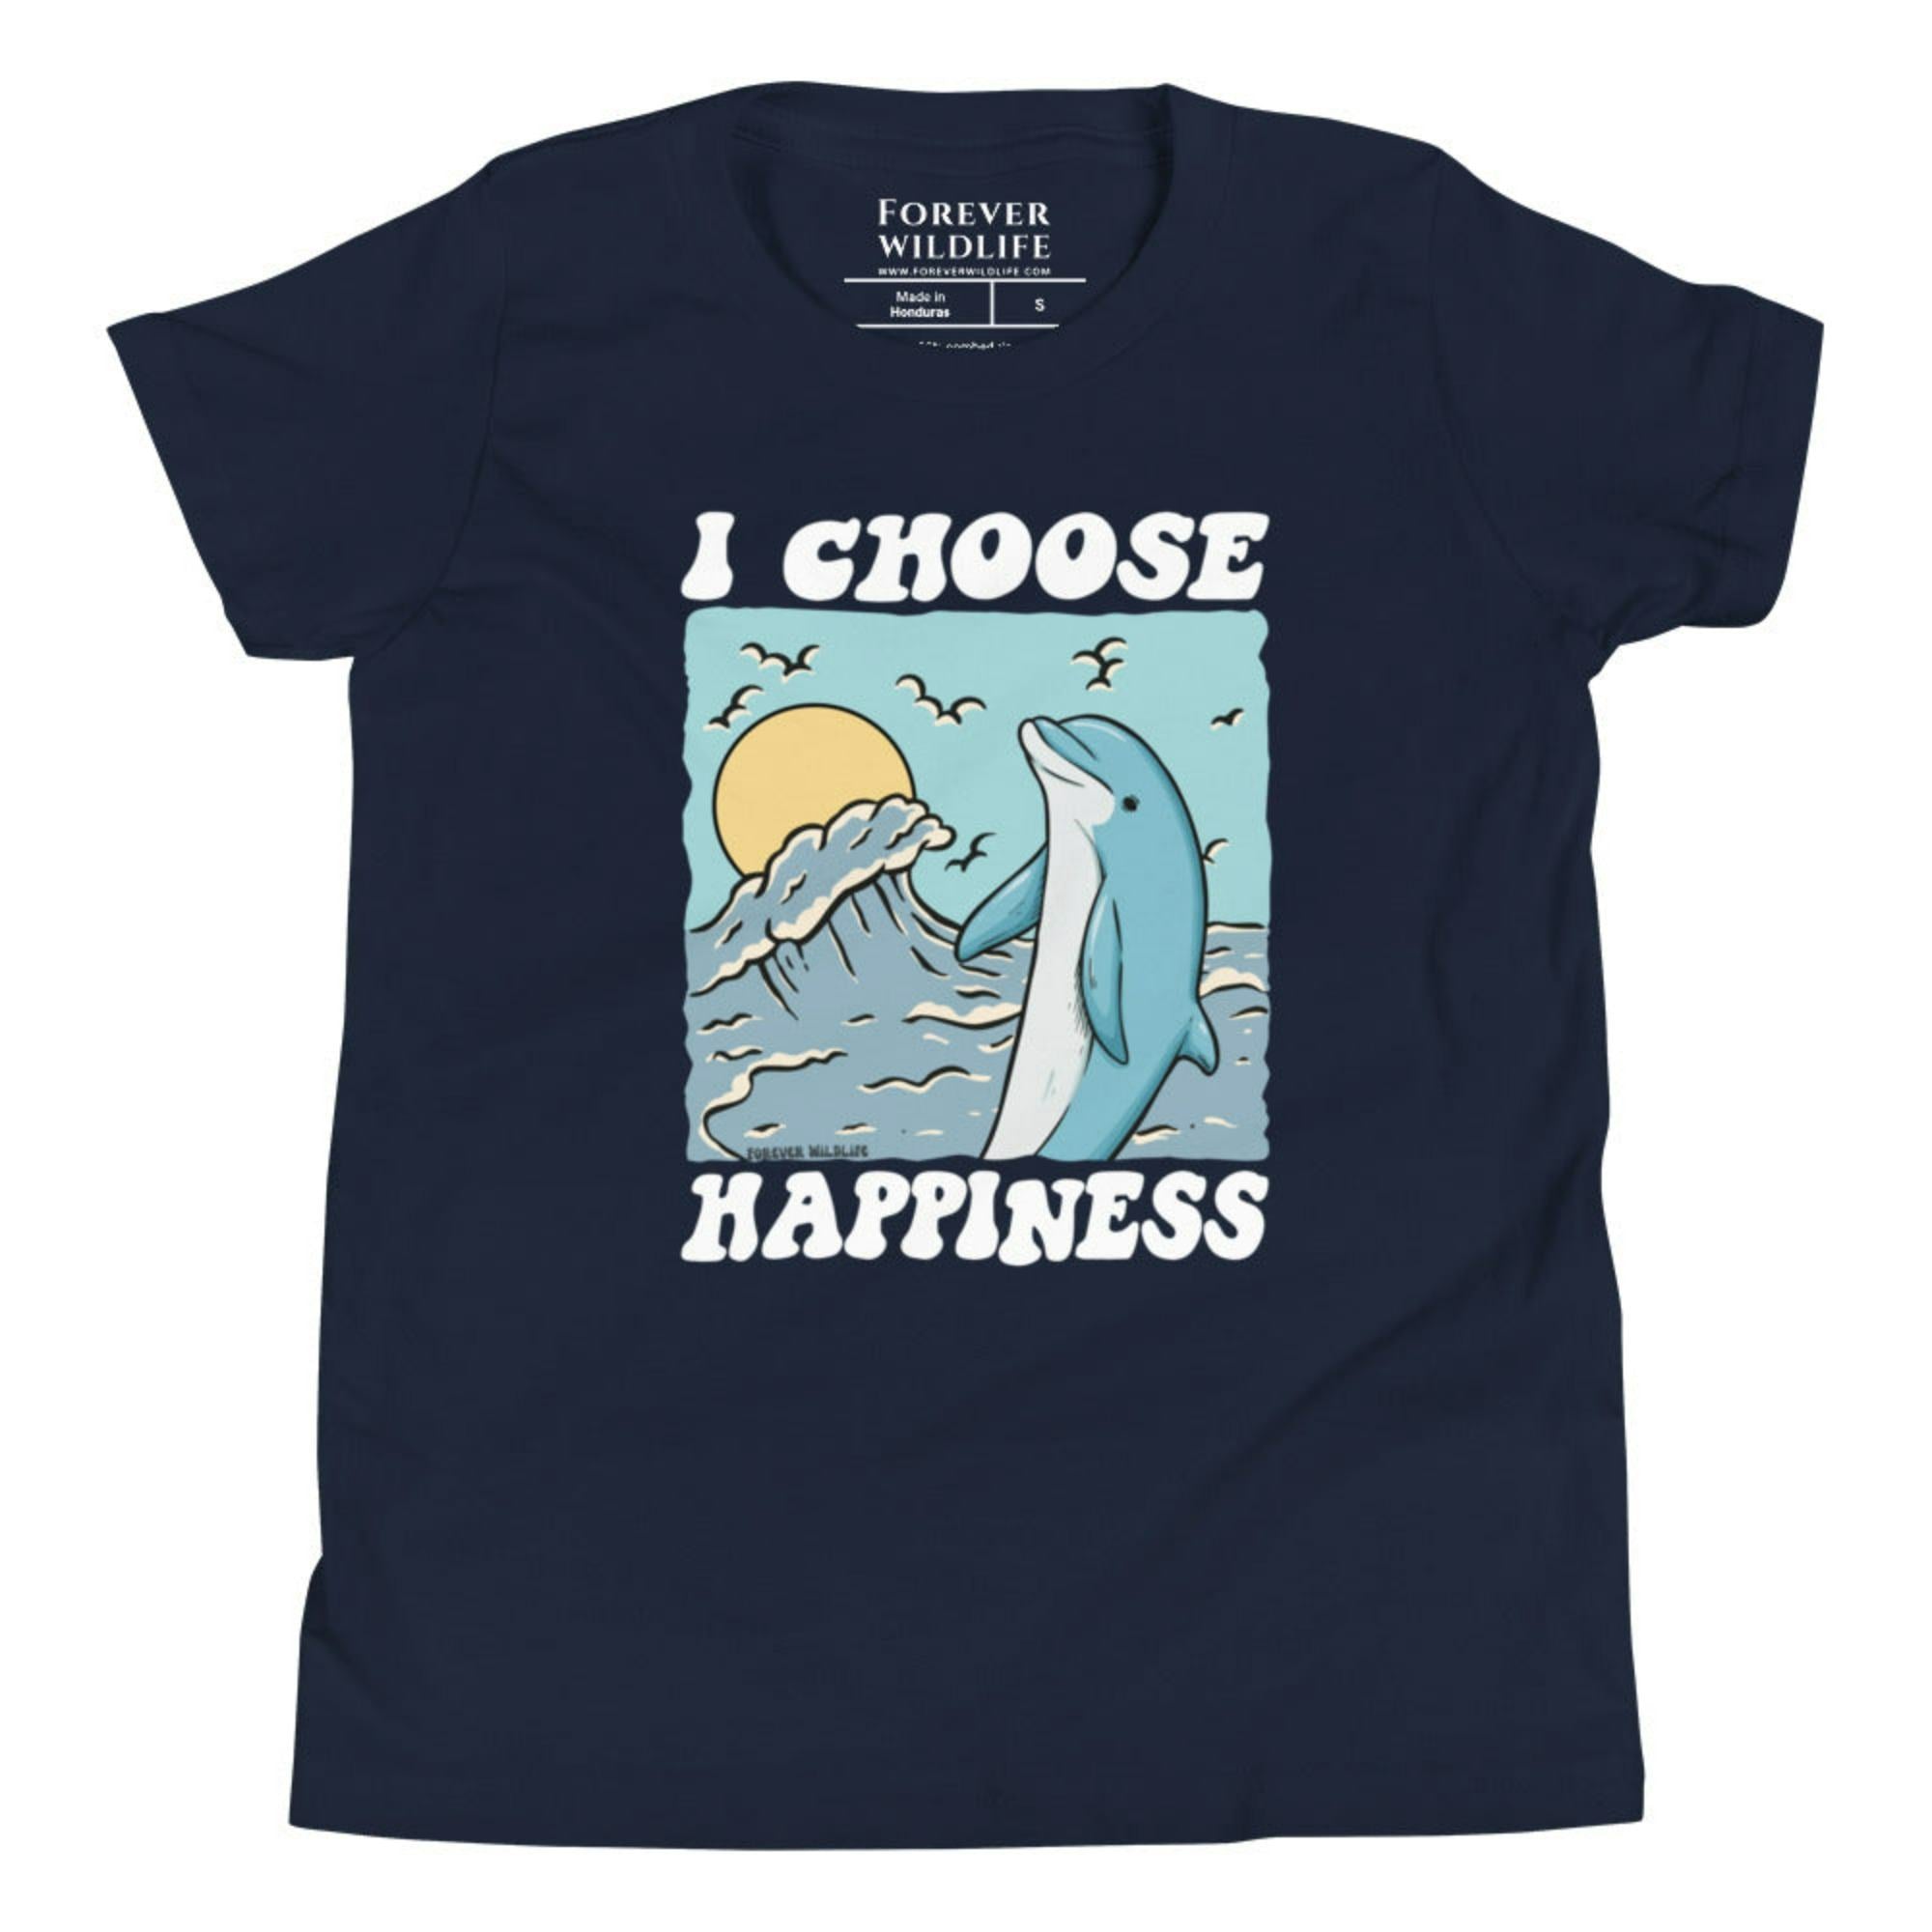 Navy Dolphin Youth T-Shirt with dolphin graphic as part of Wildlife T-Shirts, Wildlife Clothing & Apparel by Forever Wildlife